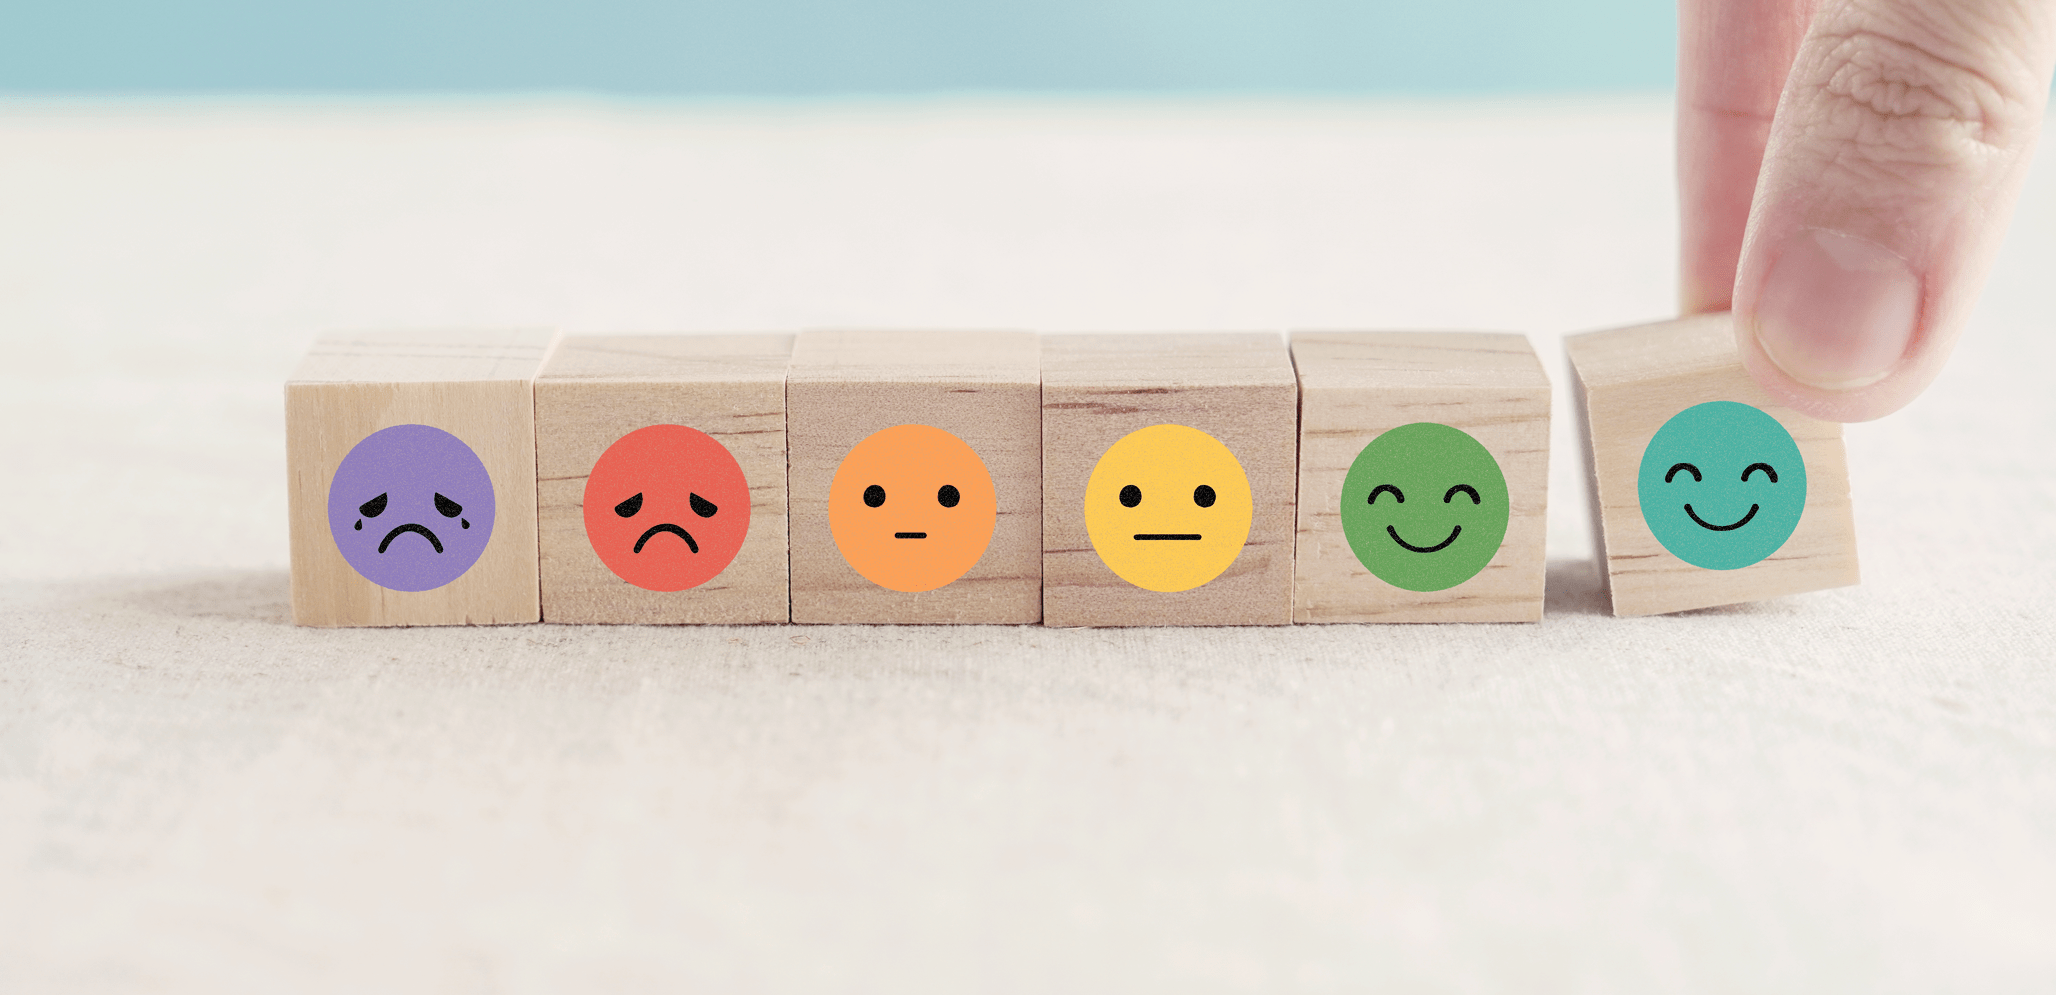 small wood blocks with colorful face emojis showing range of emotions from anger to happy.